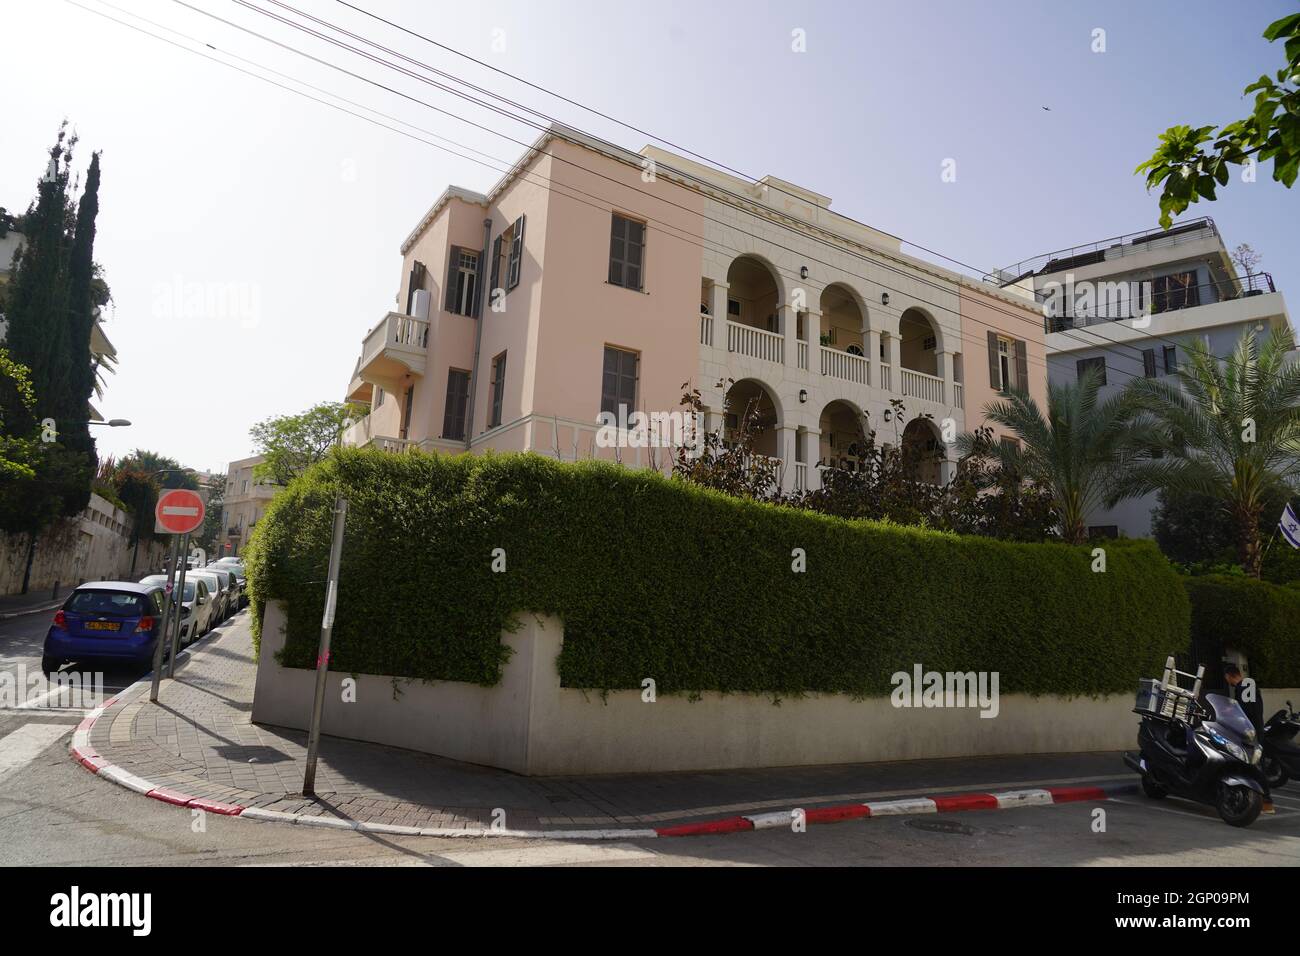 22 Idelson Street, Tel Aviv, Designed by Salomon Gepstein in 1932. in Tel  Aviv White City. The White City refers to a collection of over 4,000  buildin Stock Photo - Alamy